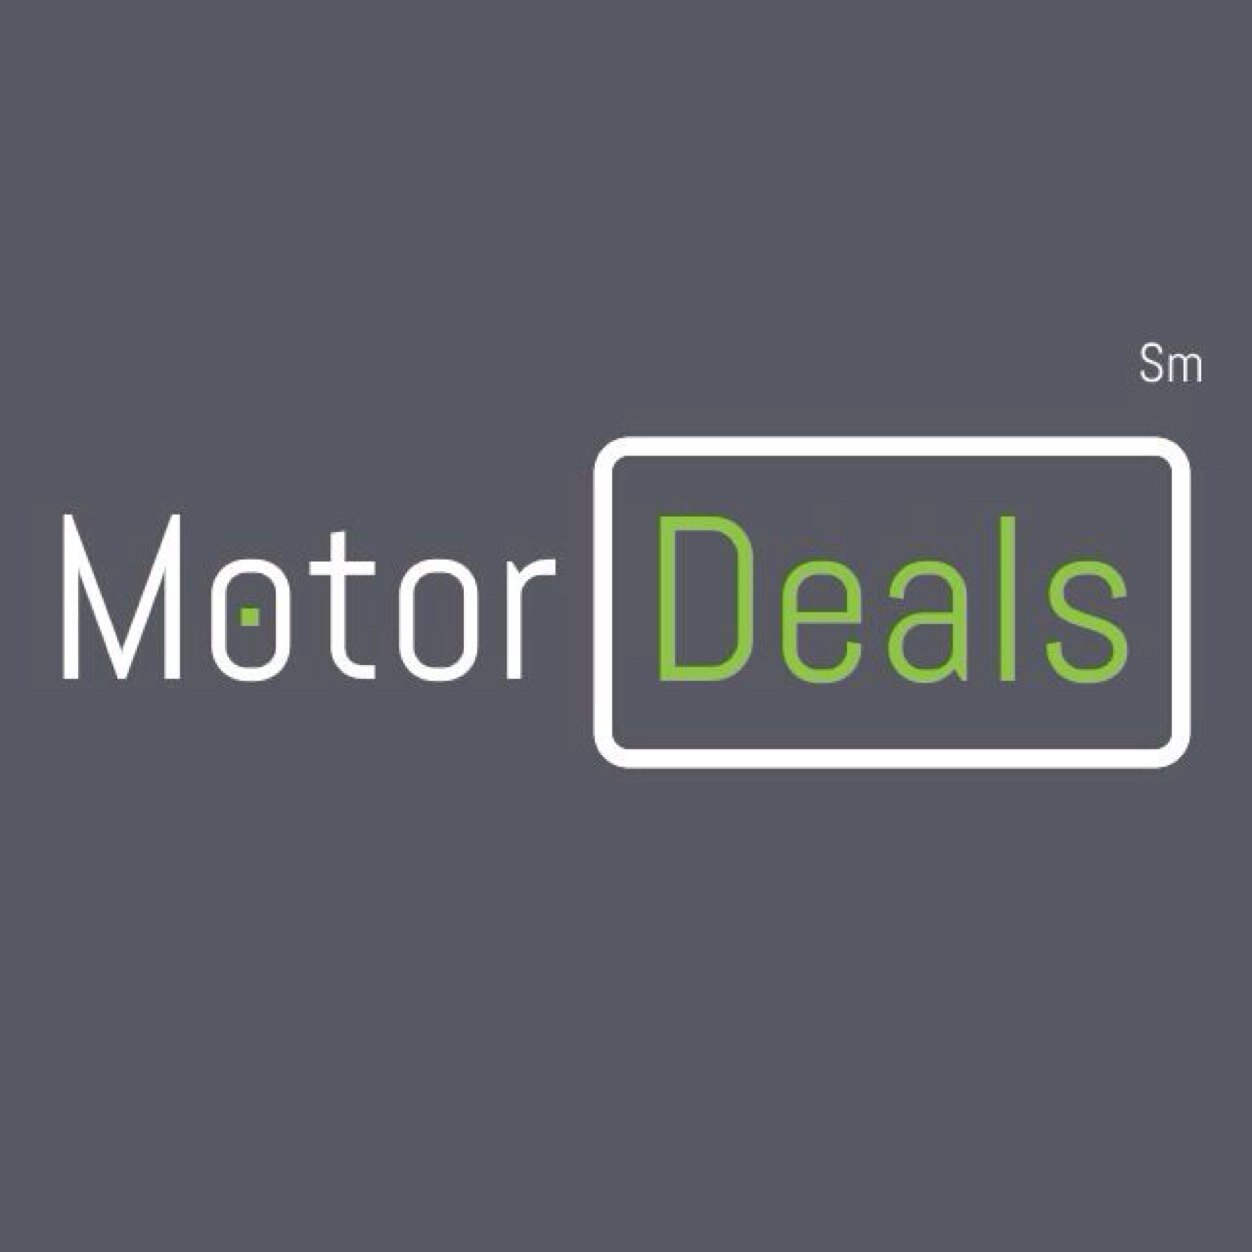 We advertise your vehicle on Motordeals for free. Just send us your vehicle's picture and discription, with your contact information to motordealsus@gmail.com